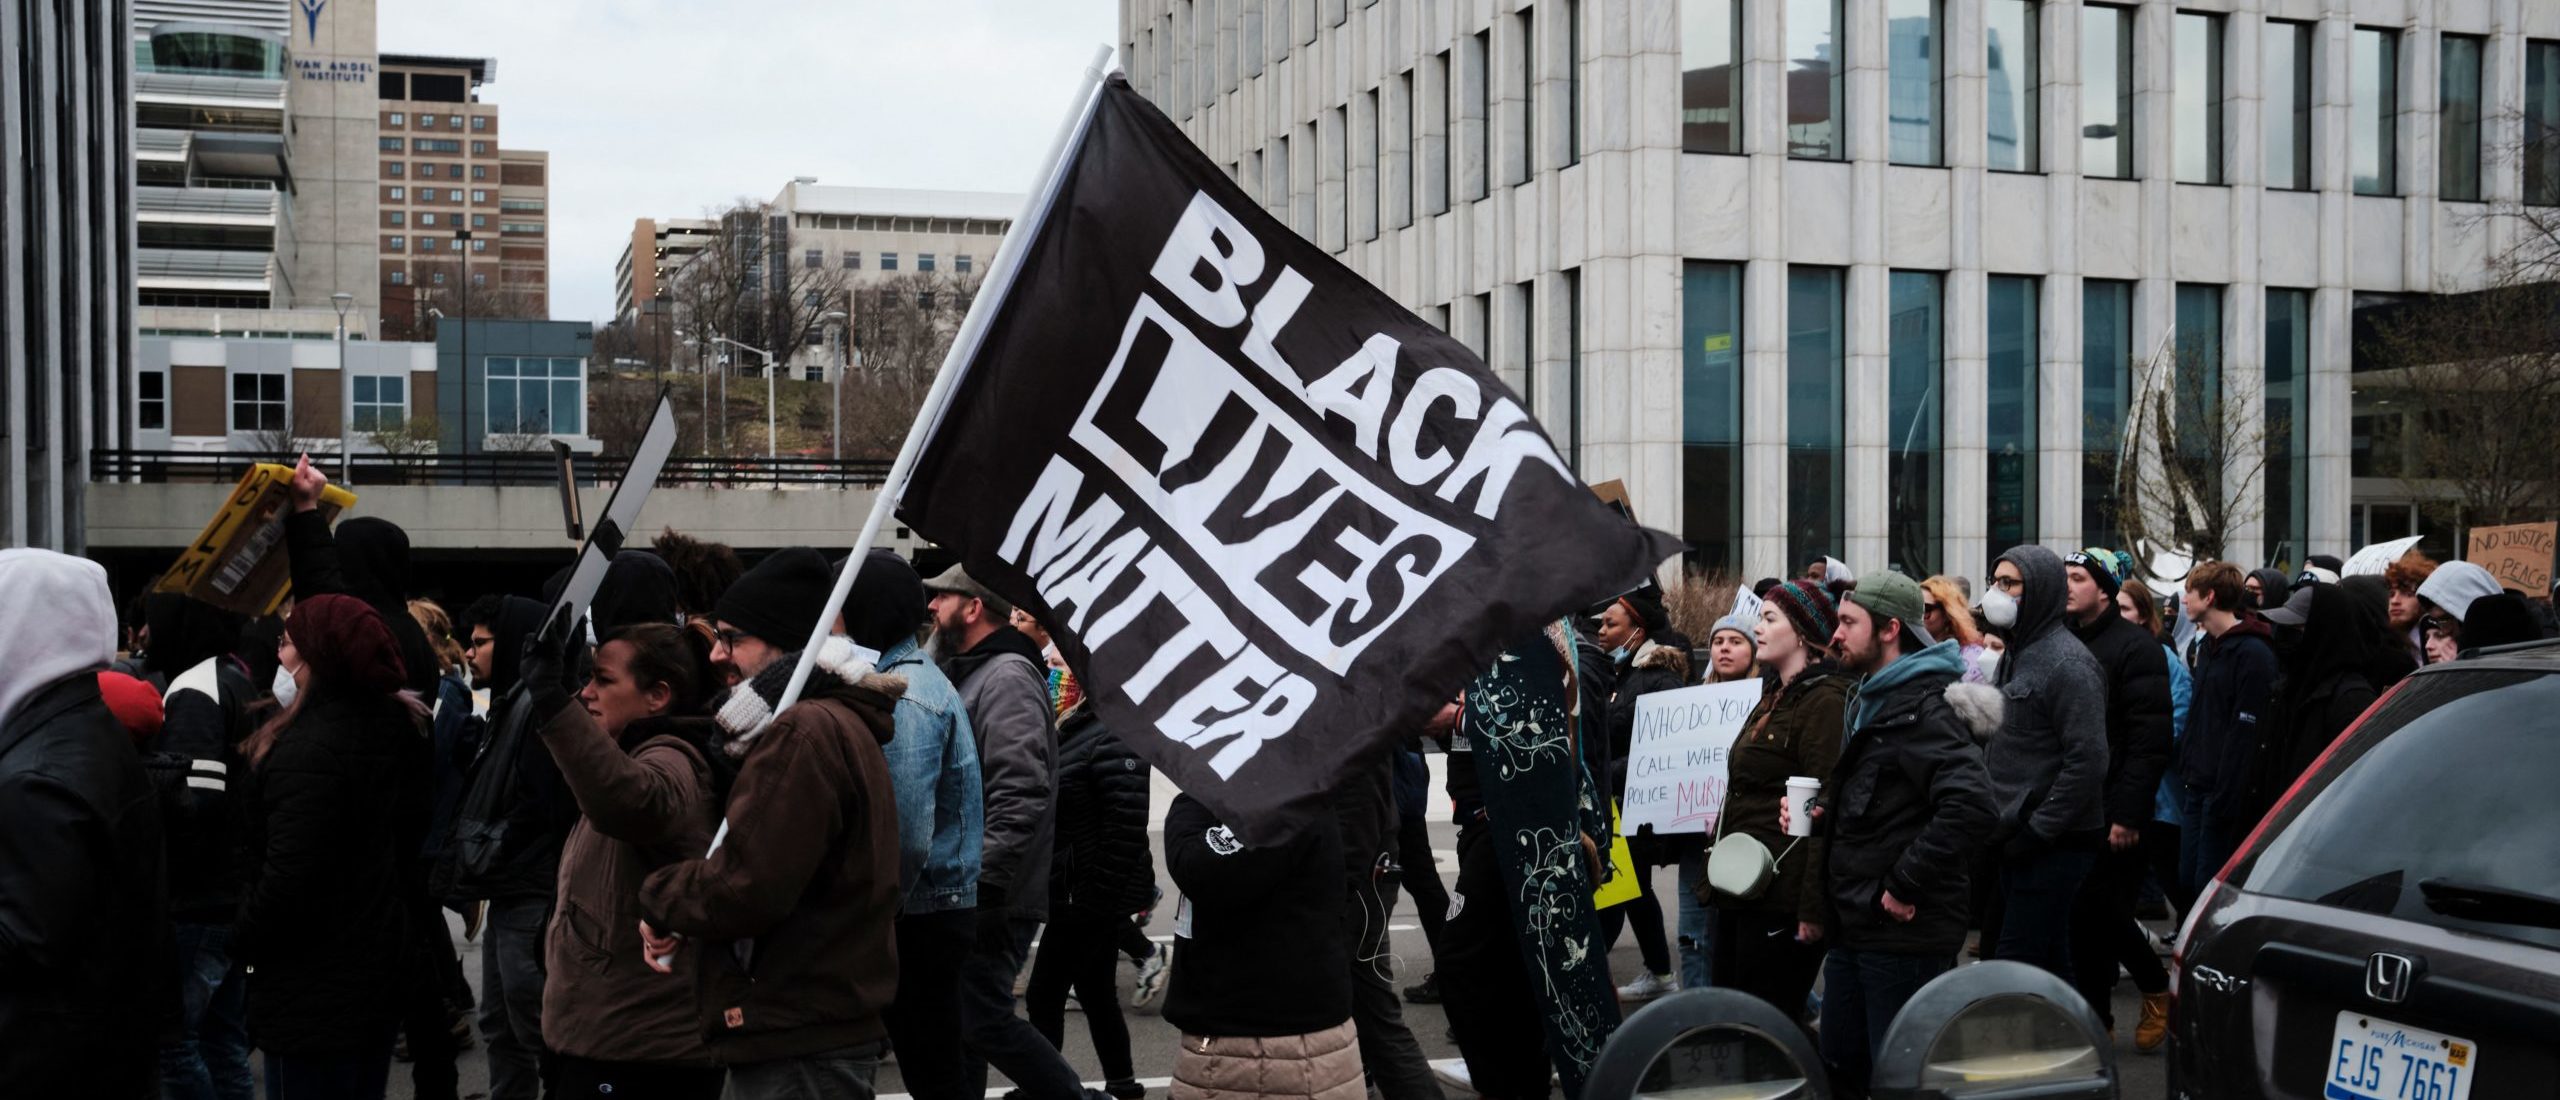 Protesters hold a Black Lives Matter flag as they march for Patrick Lyoya, a Black man who was fatally shot by a police officer, in downtown Grand Rapids, Michigan, April 16, 2022. - One of four videos from the April 4 incident shows the officer lying on the back of 26-year-old Black man Patrick Lyoya as the two scuffled after a traffic stop and then appearing to shoot him in the head. (Photo by MUSTAFA HUSSAIN and Mustafa Hussain / AFP) (